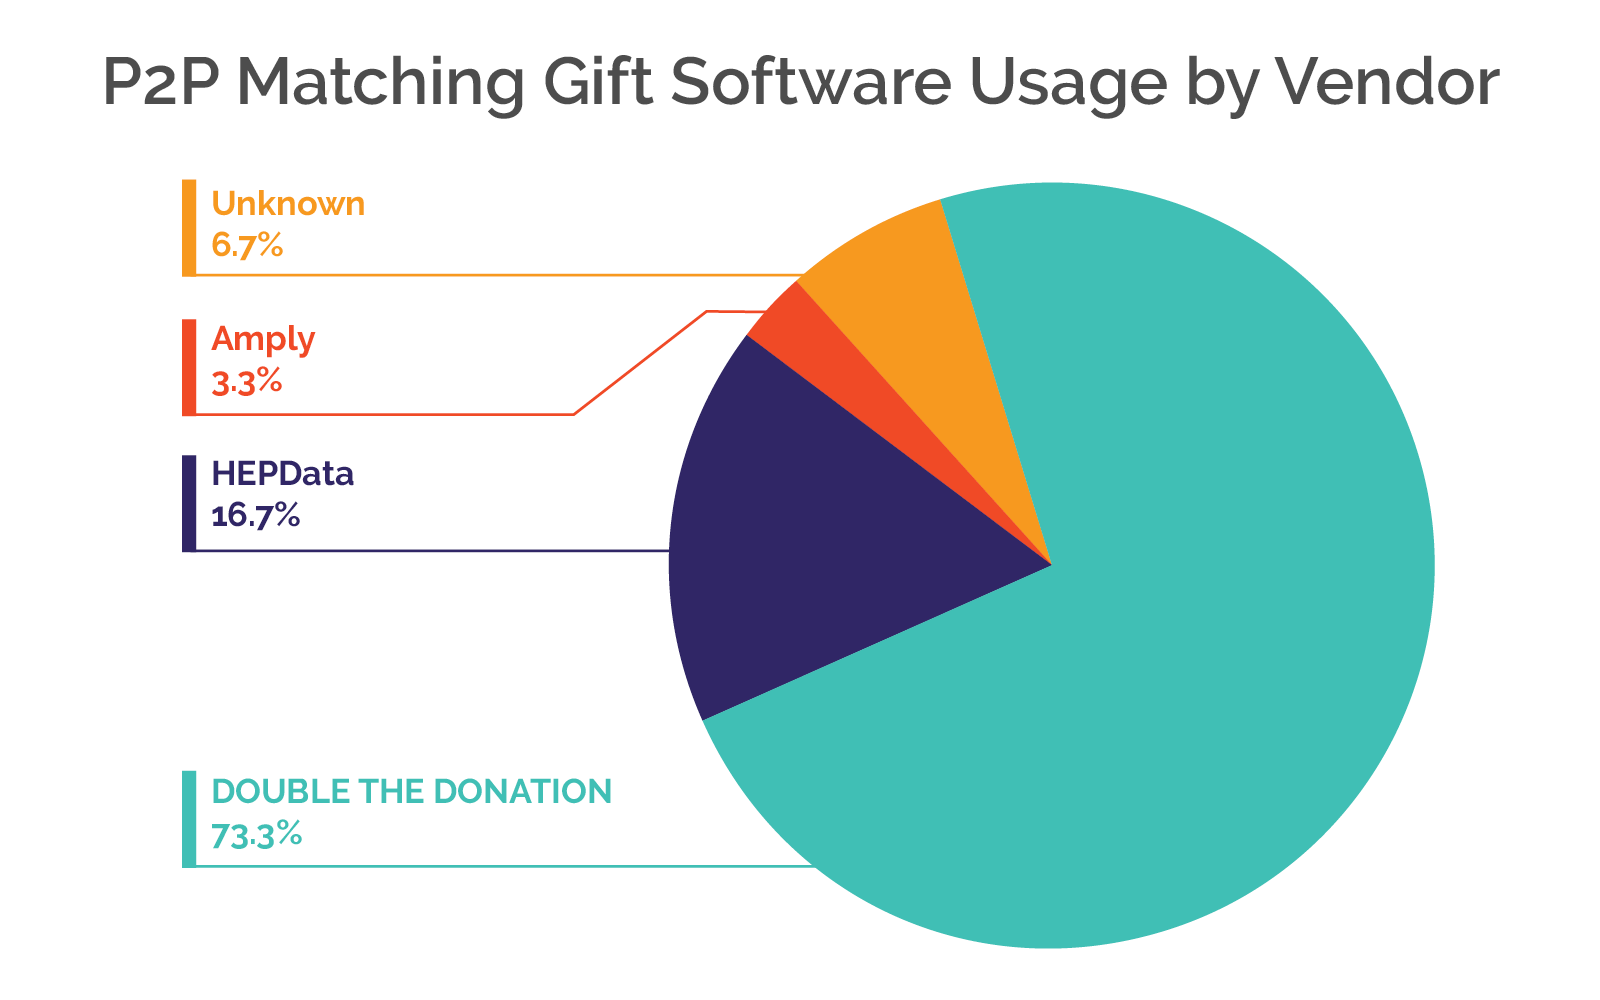 This graph shows matching gift software usage by vendor.